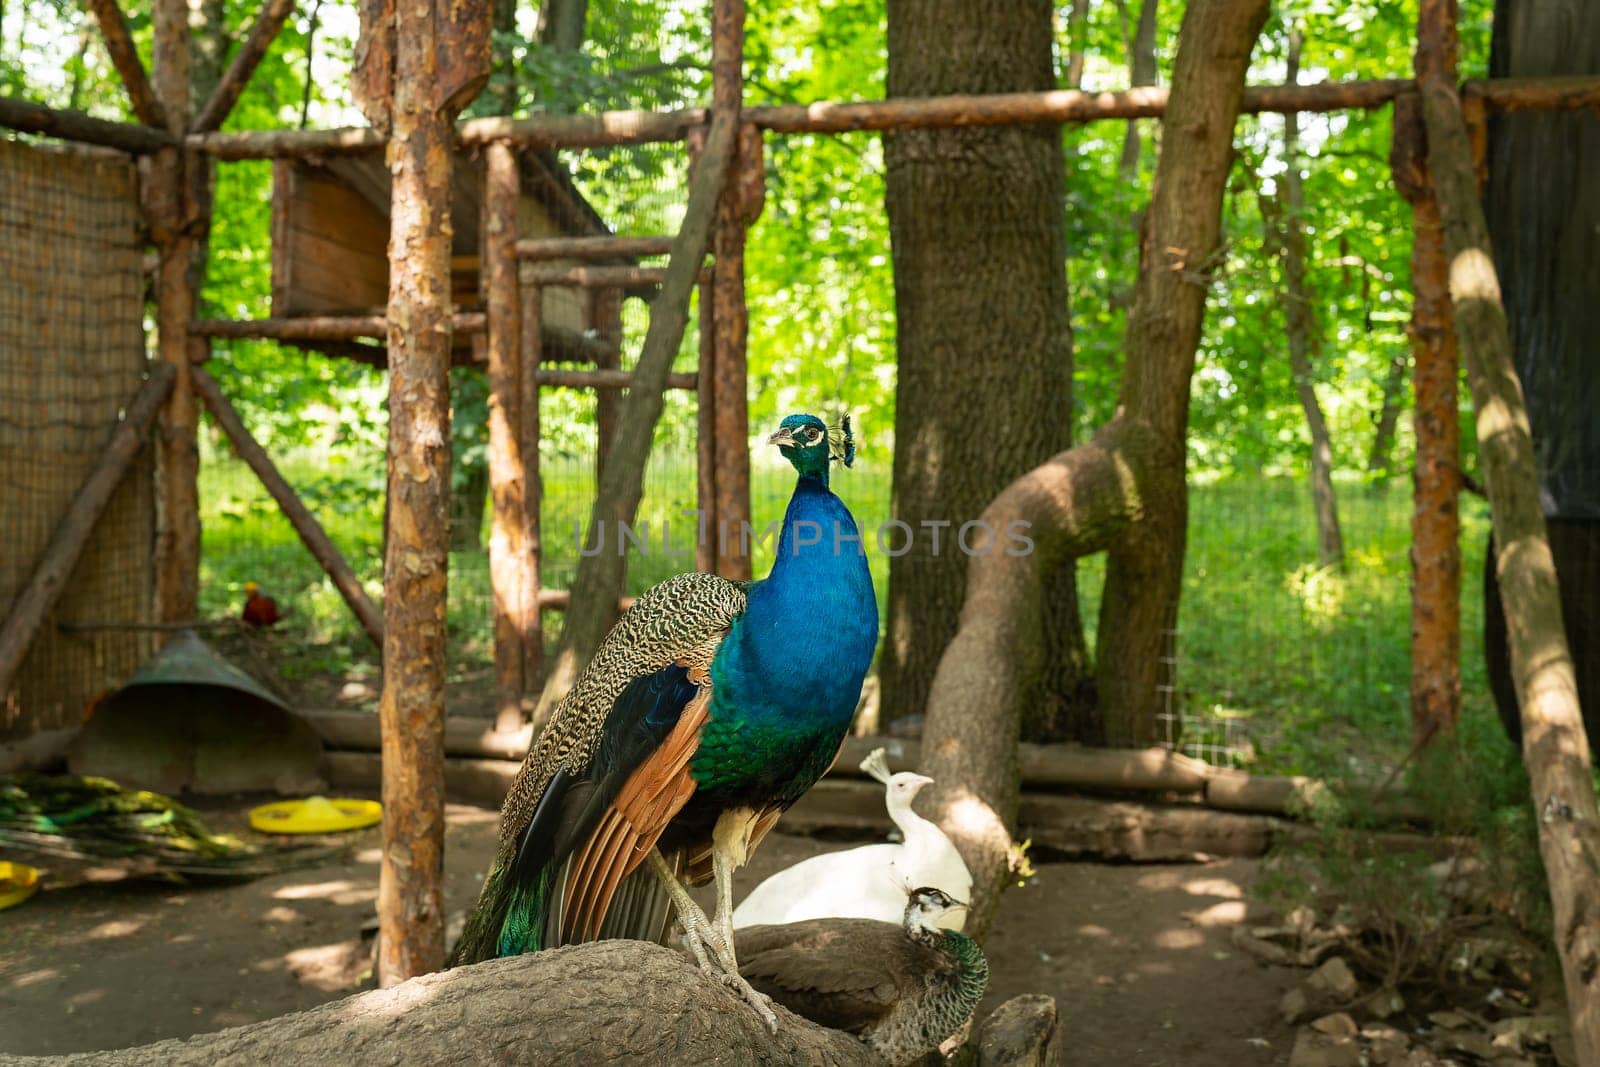 A colorful peacock sat on a wooden fence in a rustic outdoor setting with green foliage and a white peacock tree laying in the background. by sfinks